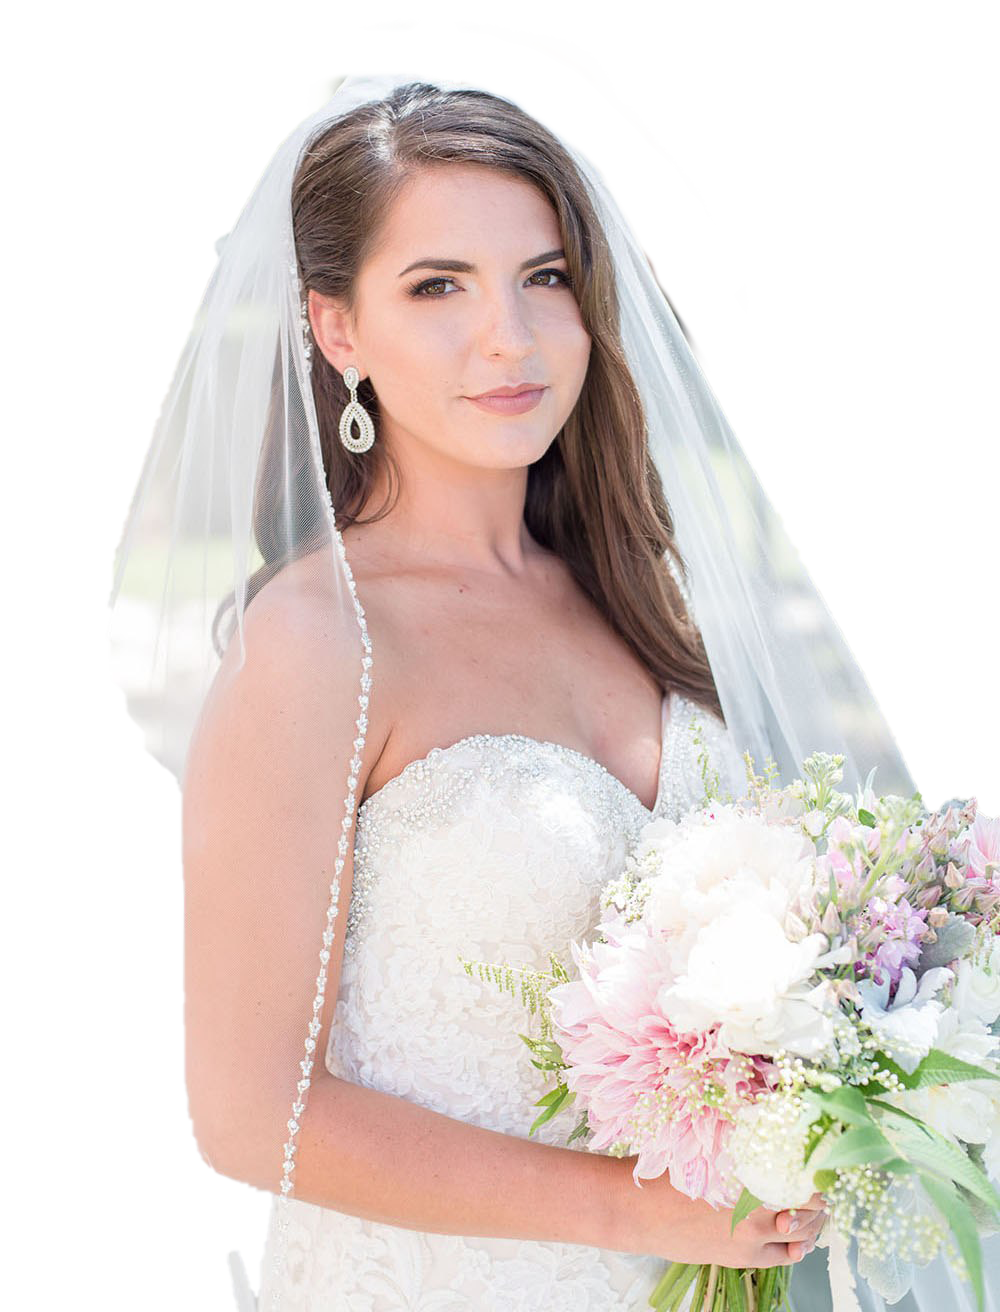 Bride PNG High Quality Image